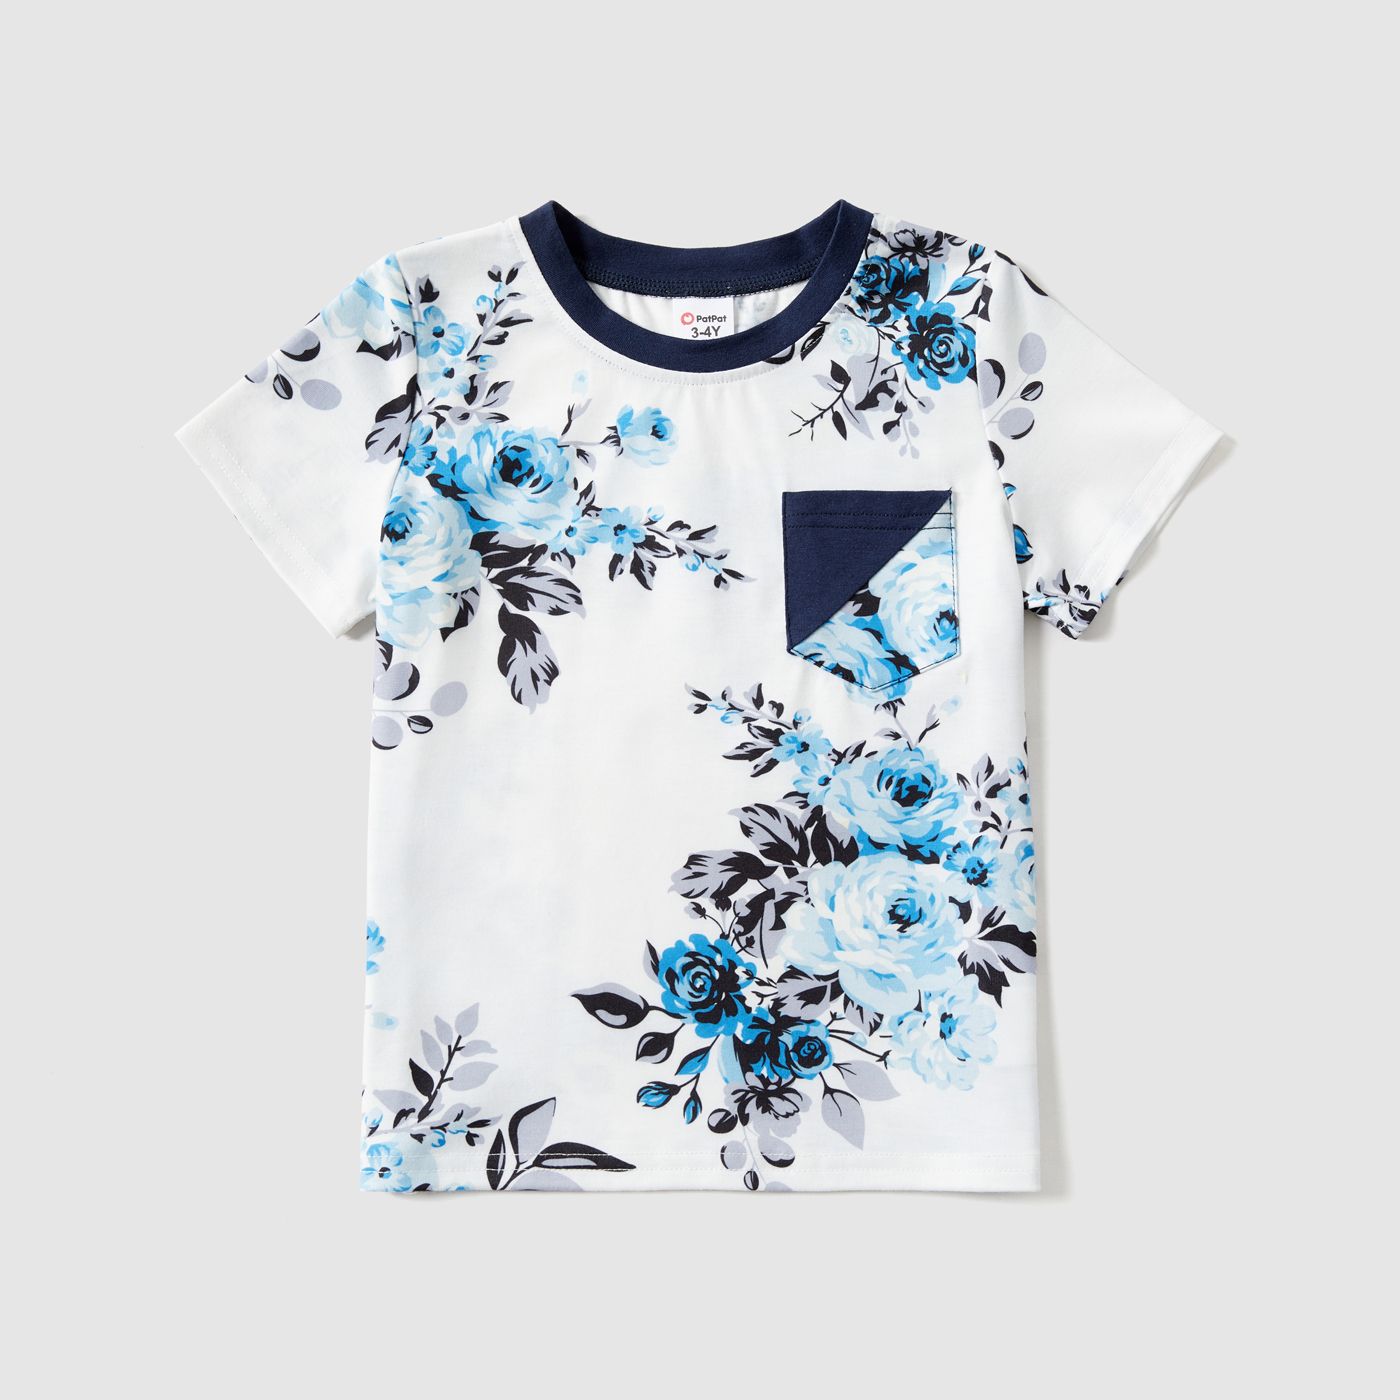 Family Matching 95% Cotton Dark Blue Short-sleeve T-shirts And Floral Print Spliced Dresses Sets